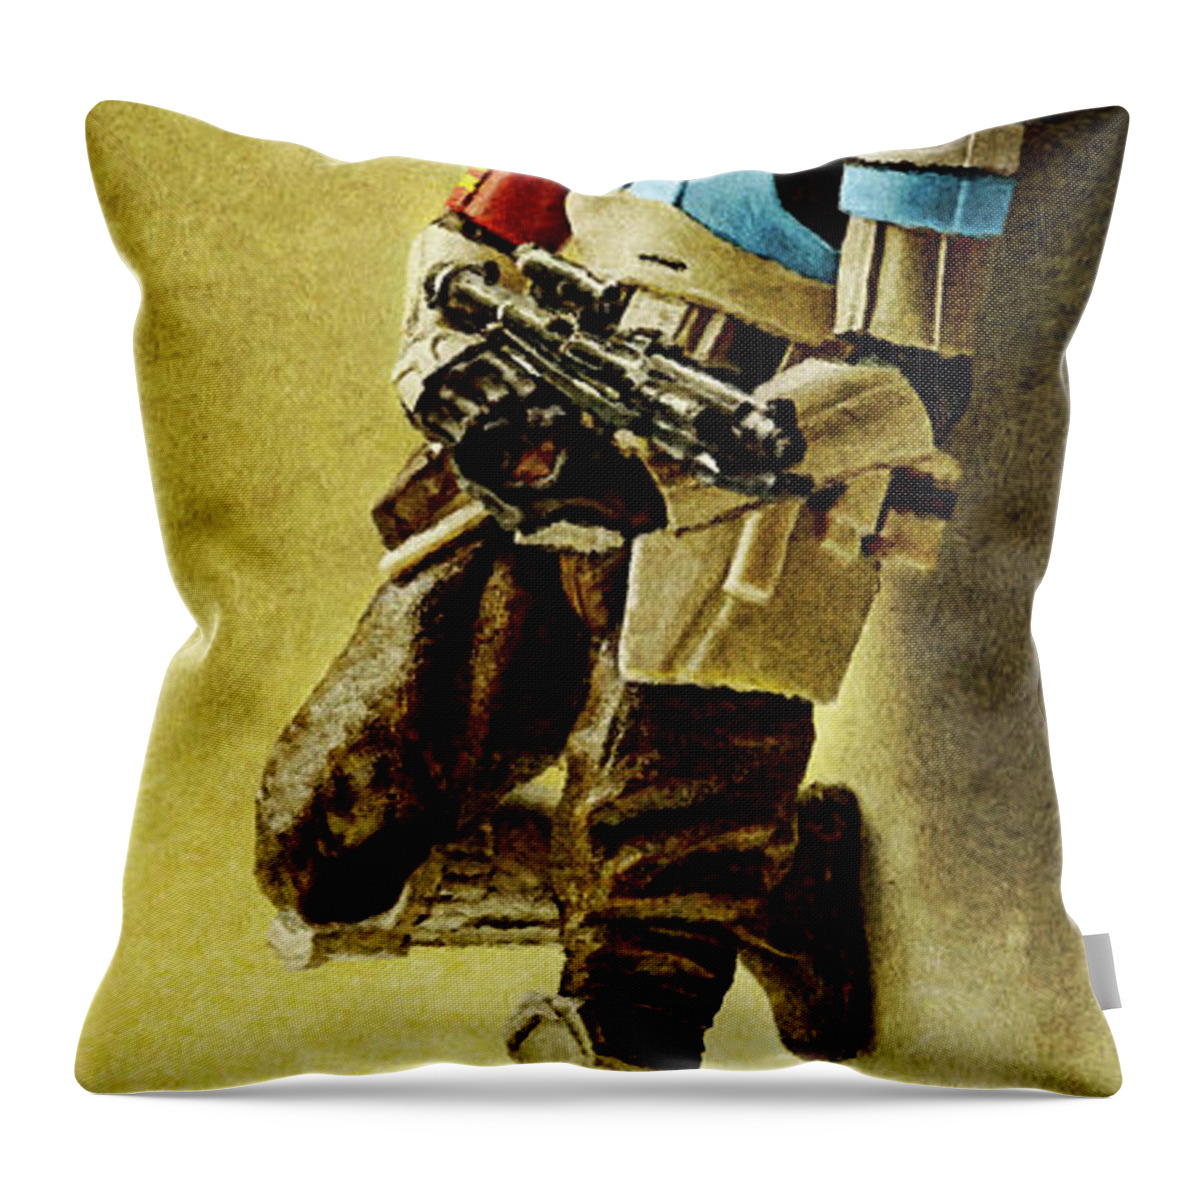 Rogue One Throw Pillow featuring the digital art Rogue One Scarif Stormtrooper - Narrow version by Weston Westmoreland